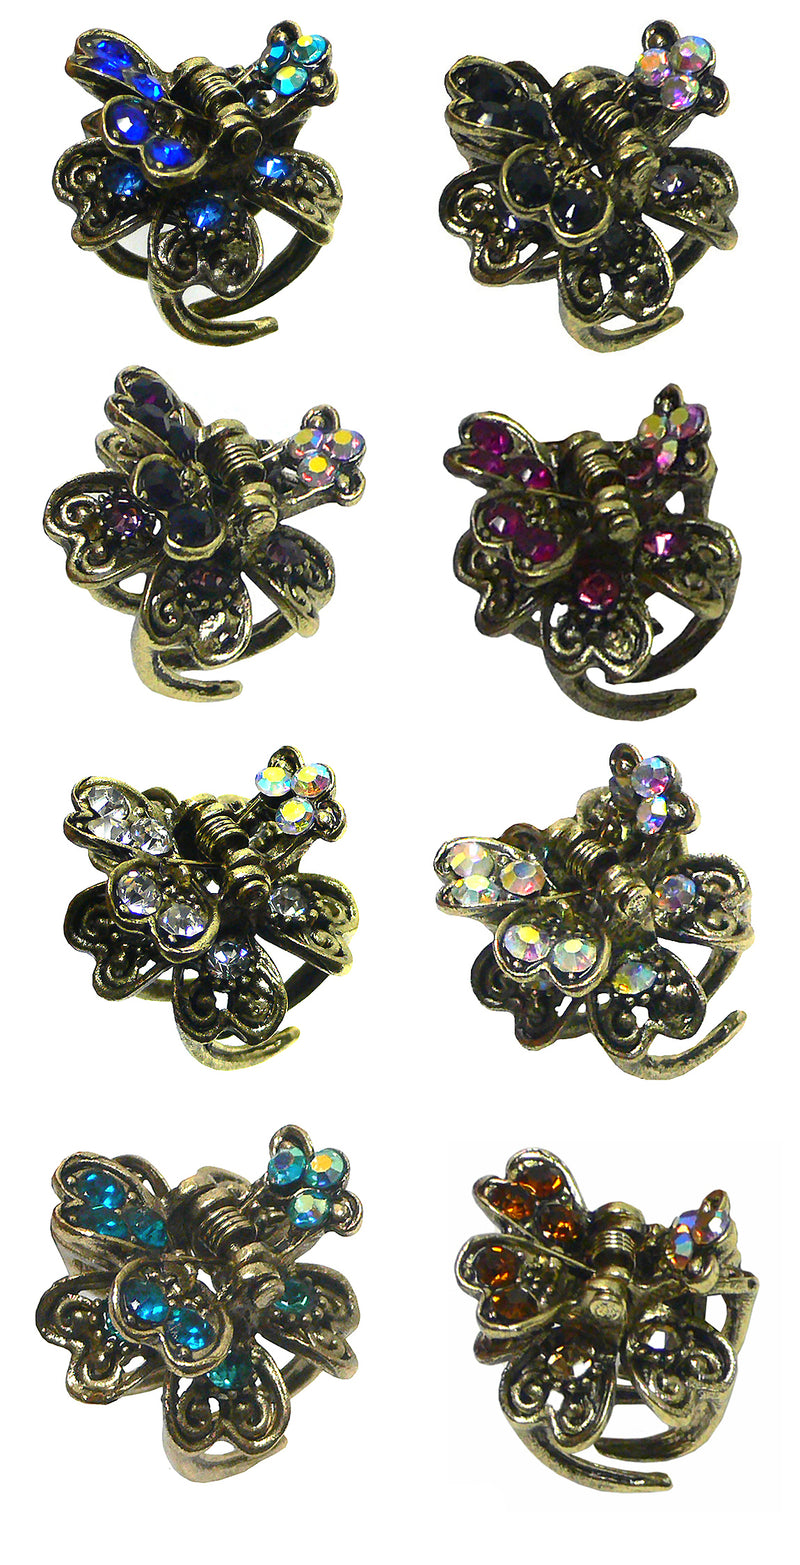 Mini Metal Jaw Claw Clips Sparkly Crystals Tiny Hair Claws Antique Gold Trim LPW864175-6